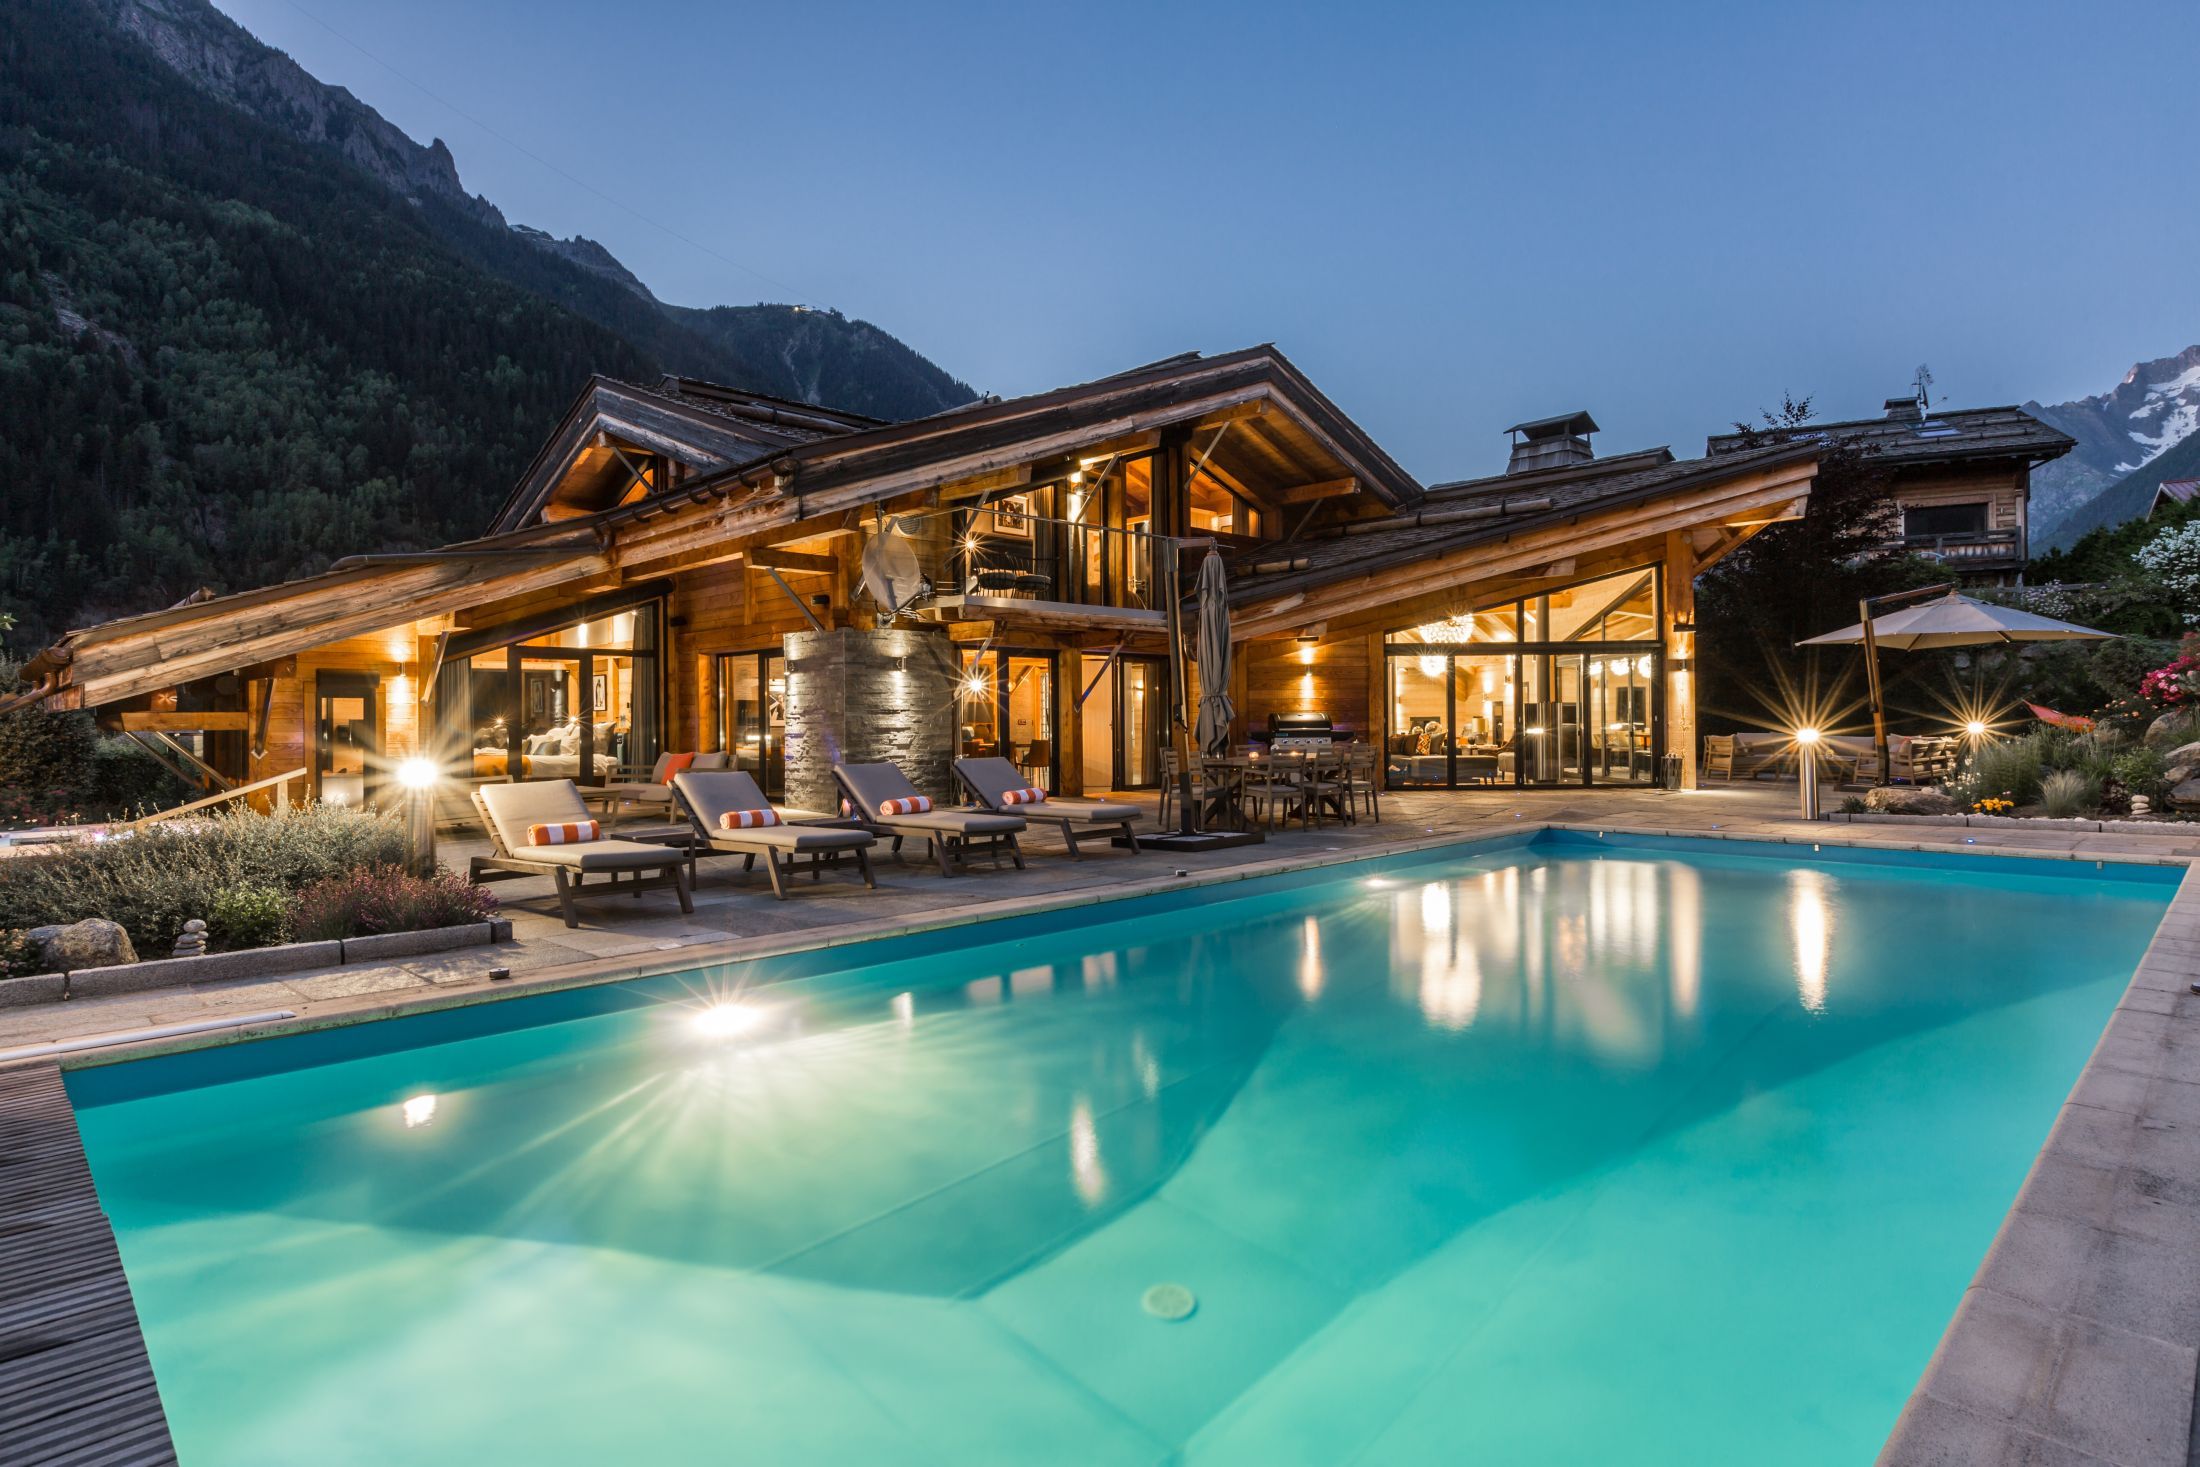 Luxury Chalet Couttet in Chamonix at dusk.